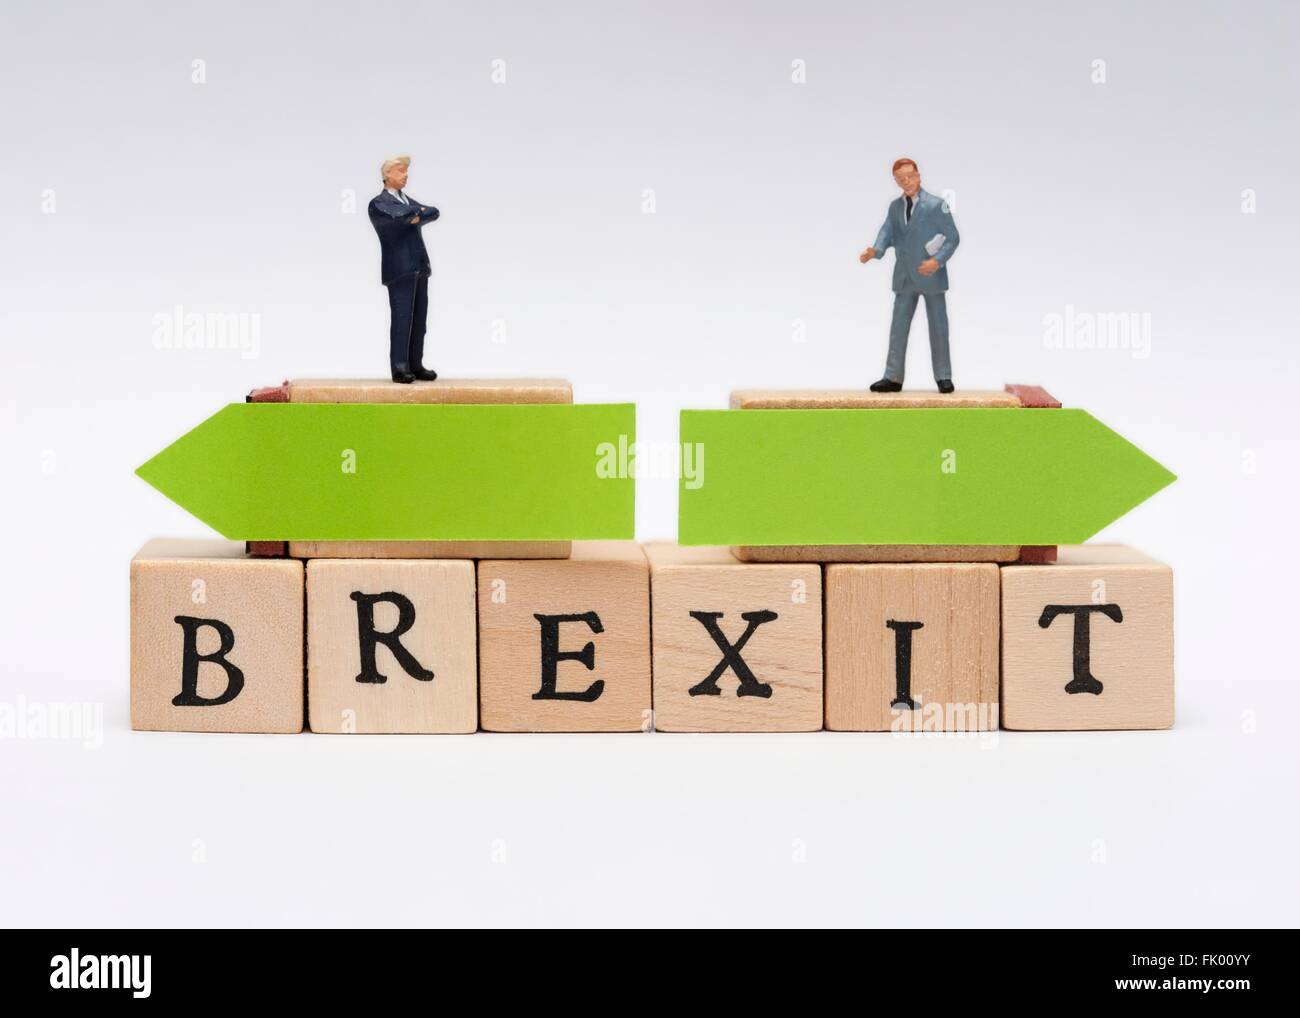 Miniature business men in suits standing on top of the word Brexit with opposing green arrows decision concept Stock Photo